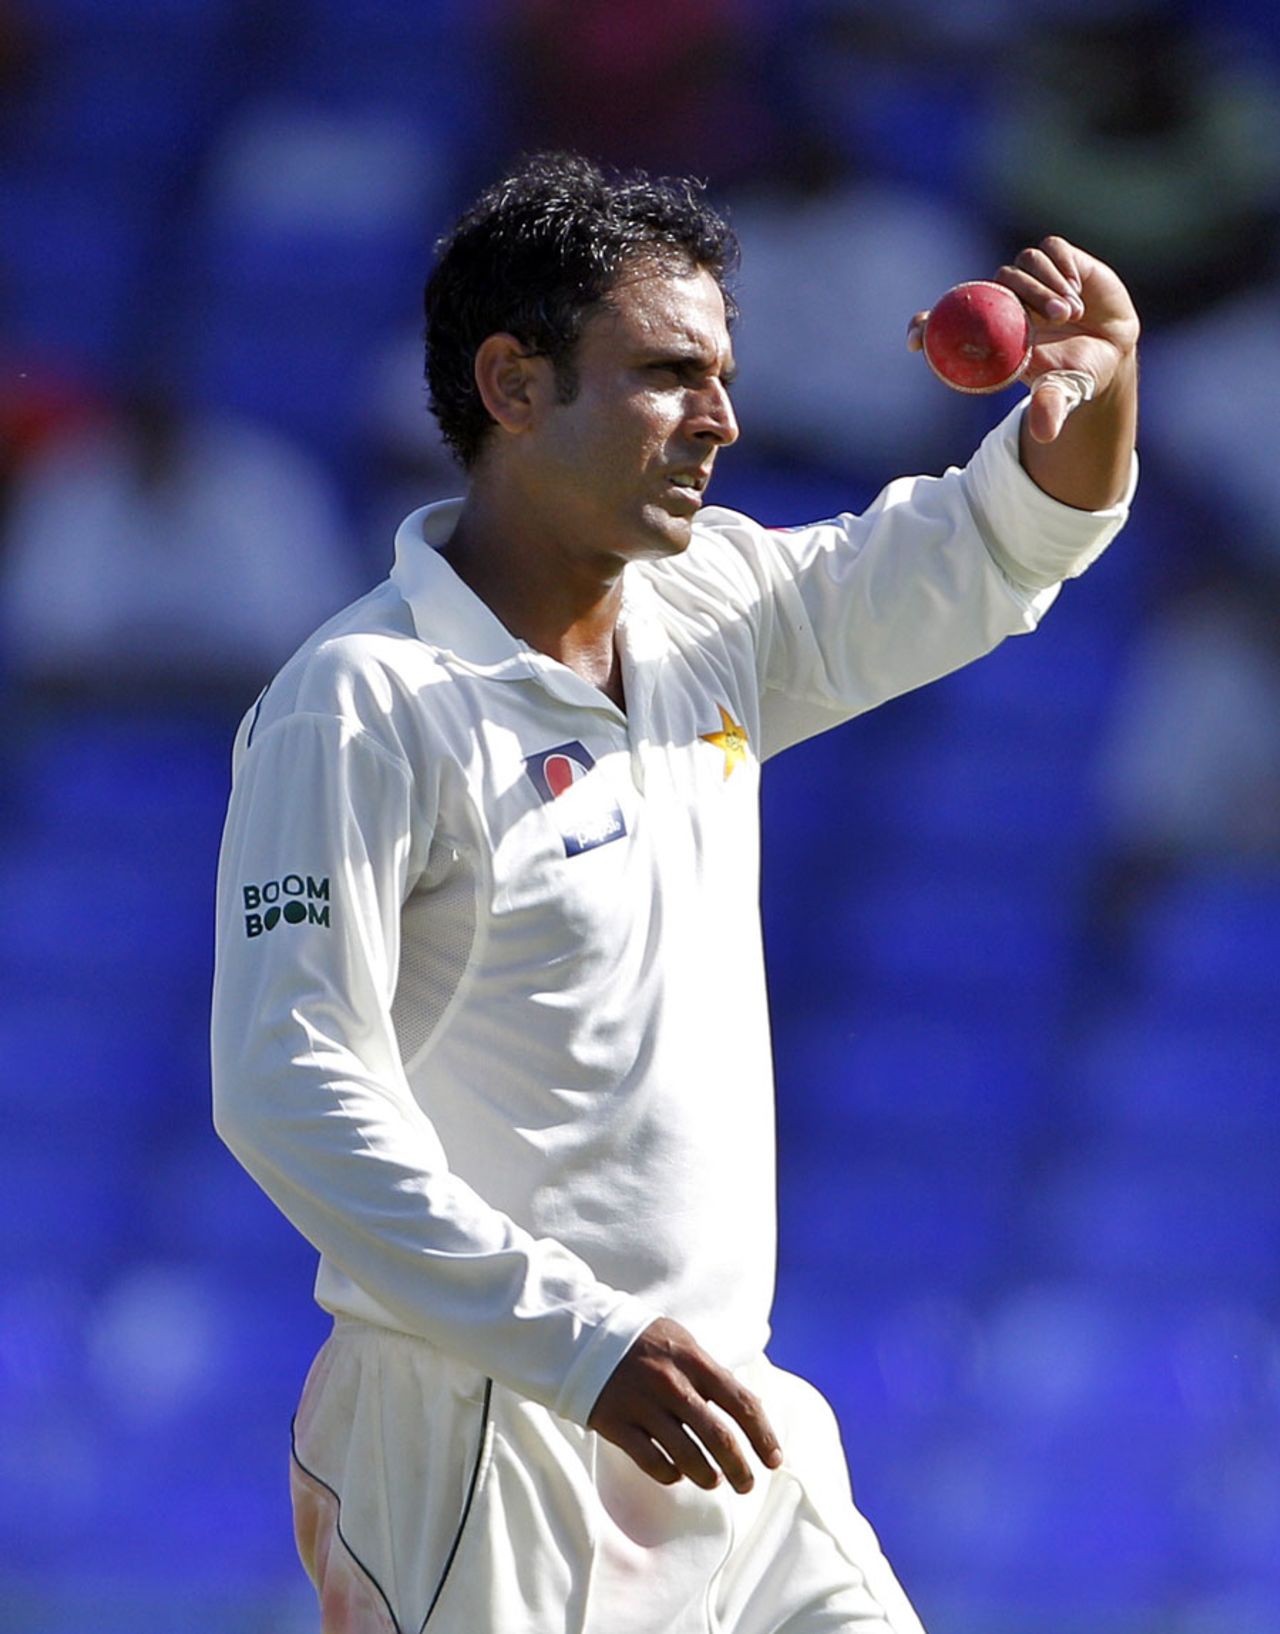 Abdur Rehman ended the fourth day with 3 for 26, West Indies v Pakistan, 2nd Test, St Kitts, 4th day, May 23, 2011